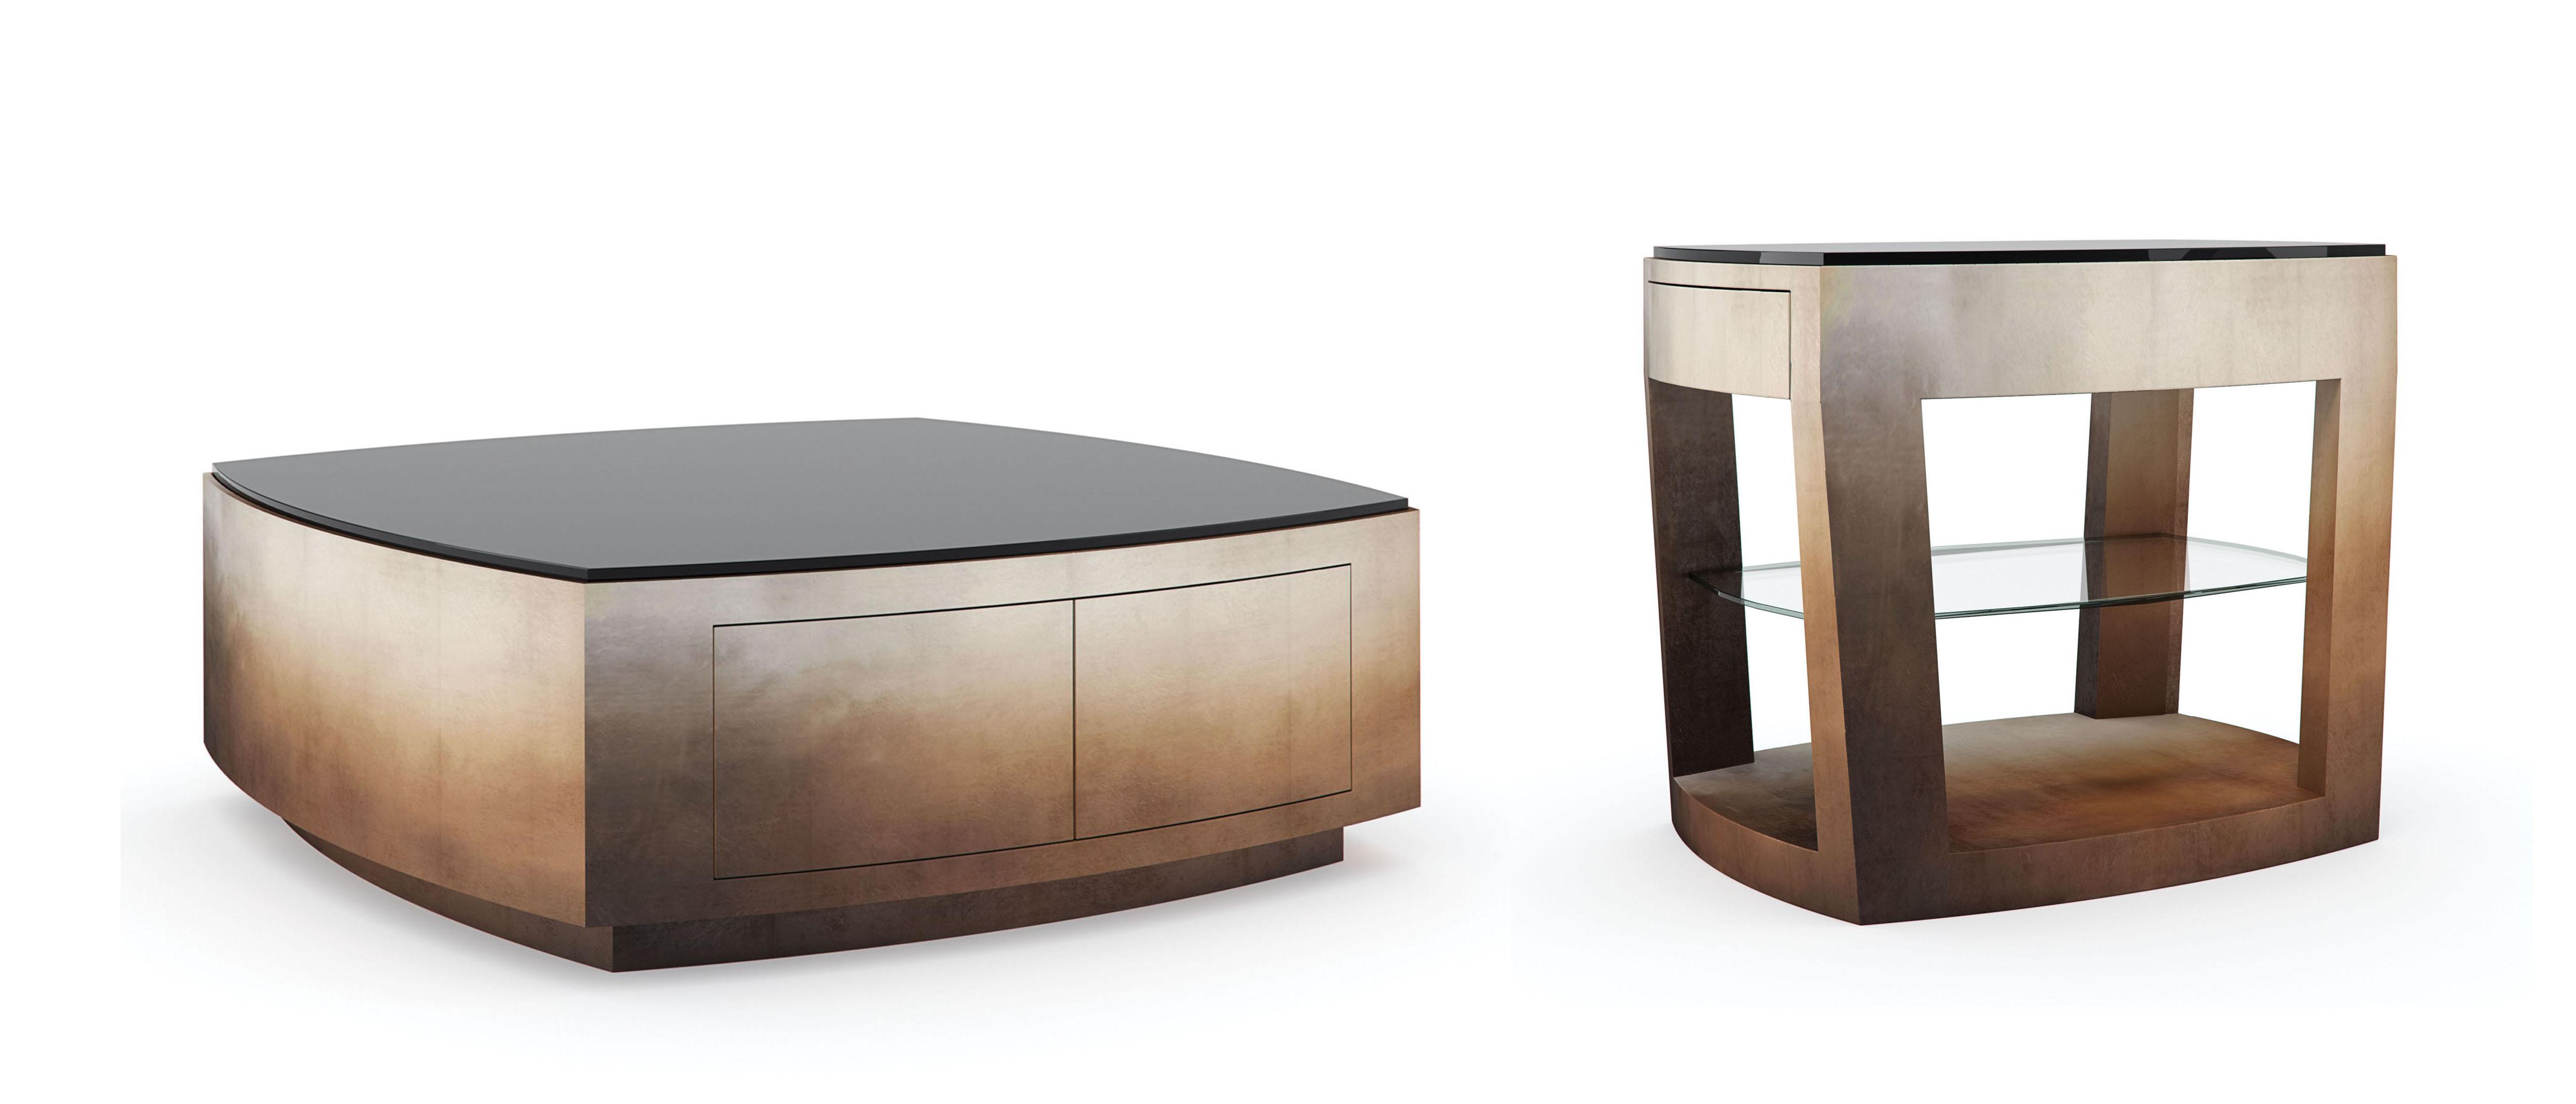 Contemporary Coffee Table Set CASE CLOSED / OPEN ENDED CLA-020-402-Set-2 in Smoked, Brown 